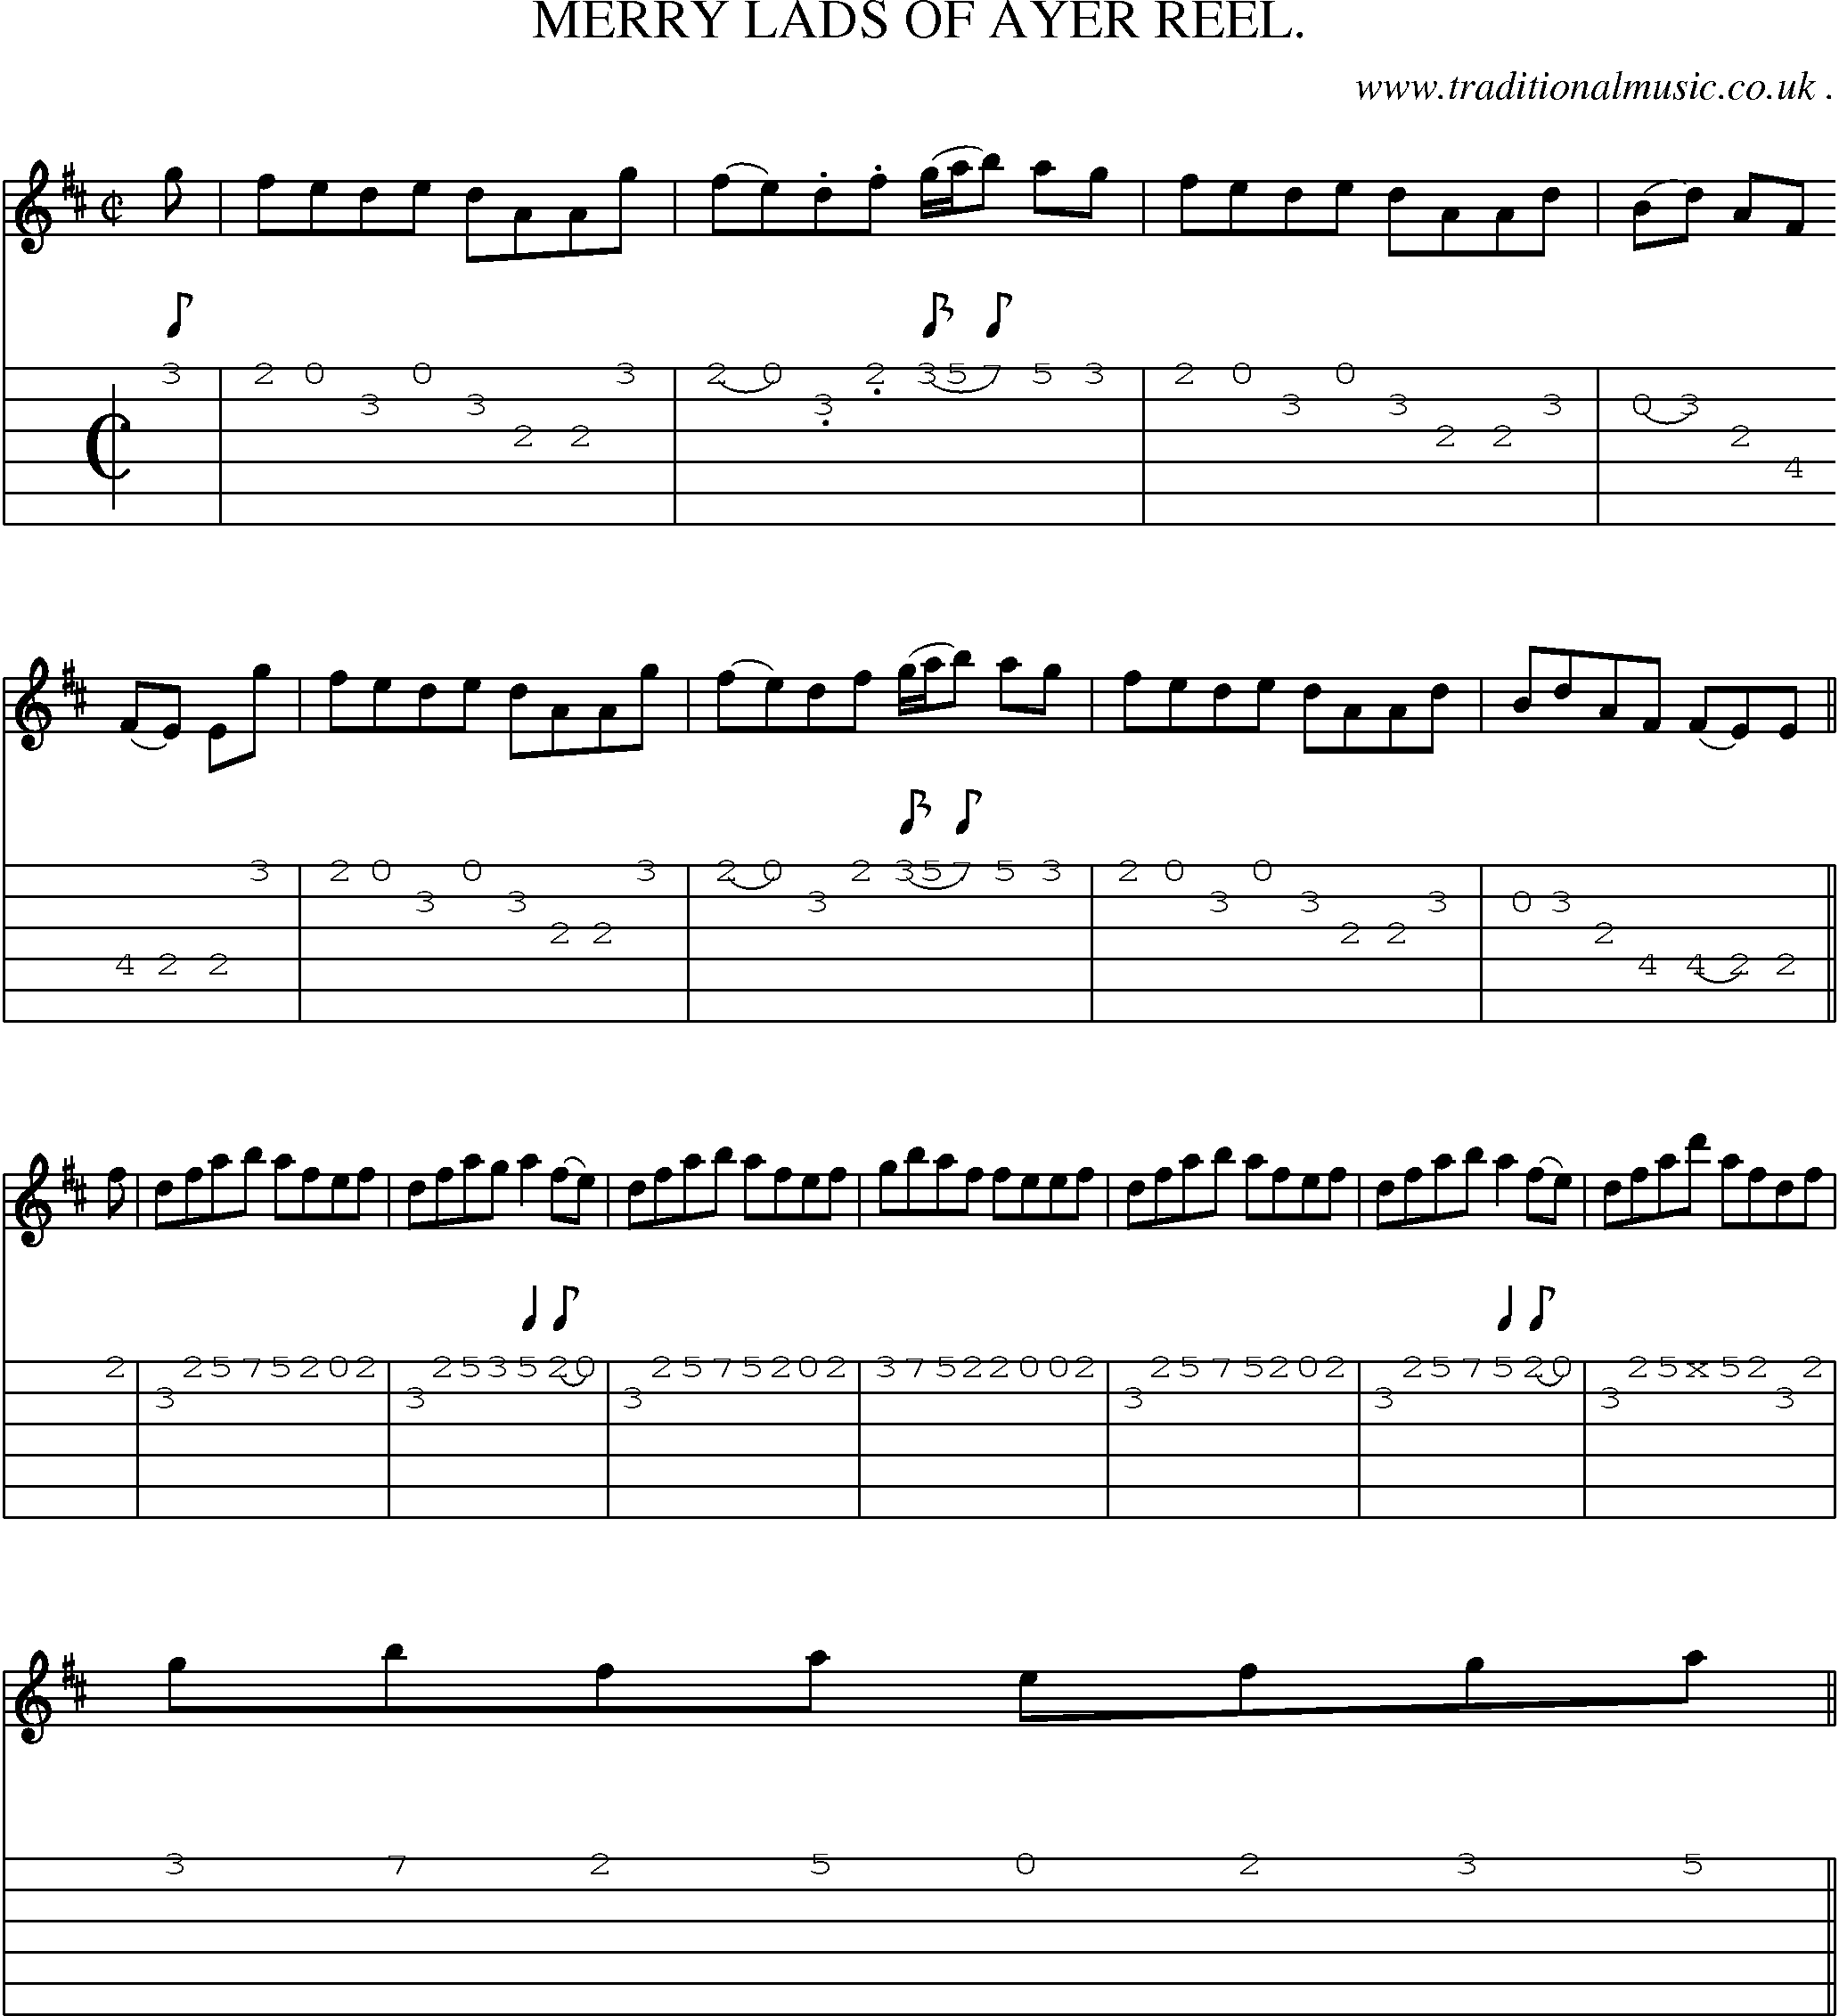 Sheet-Music and Guitar Tabs for Merry Lads Of Ayer Reel